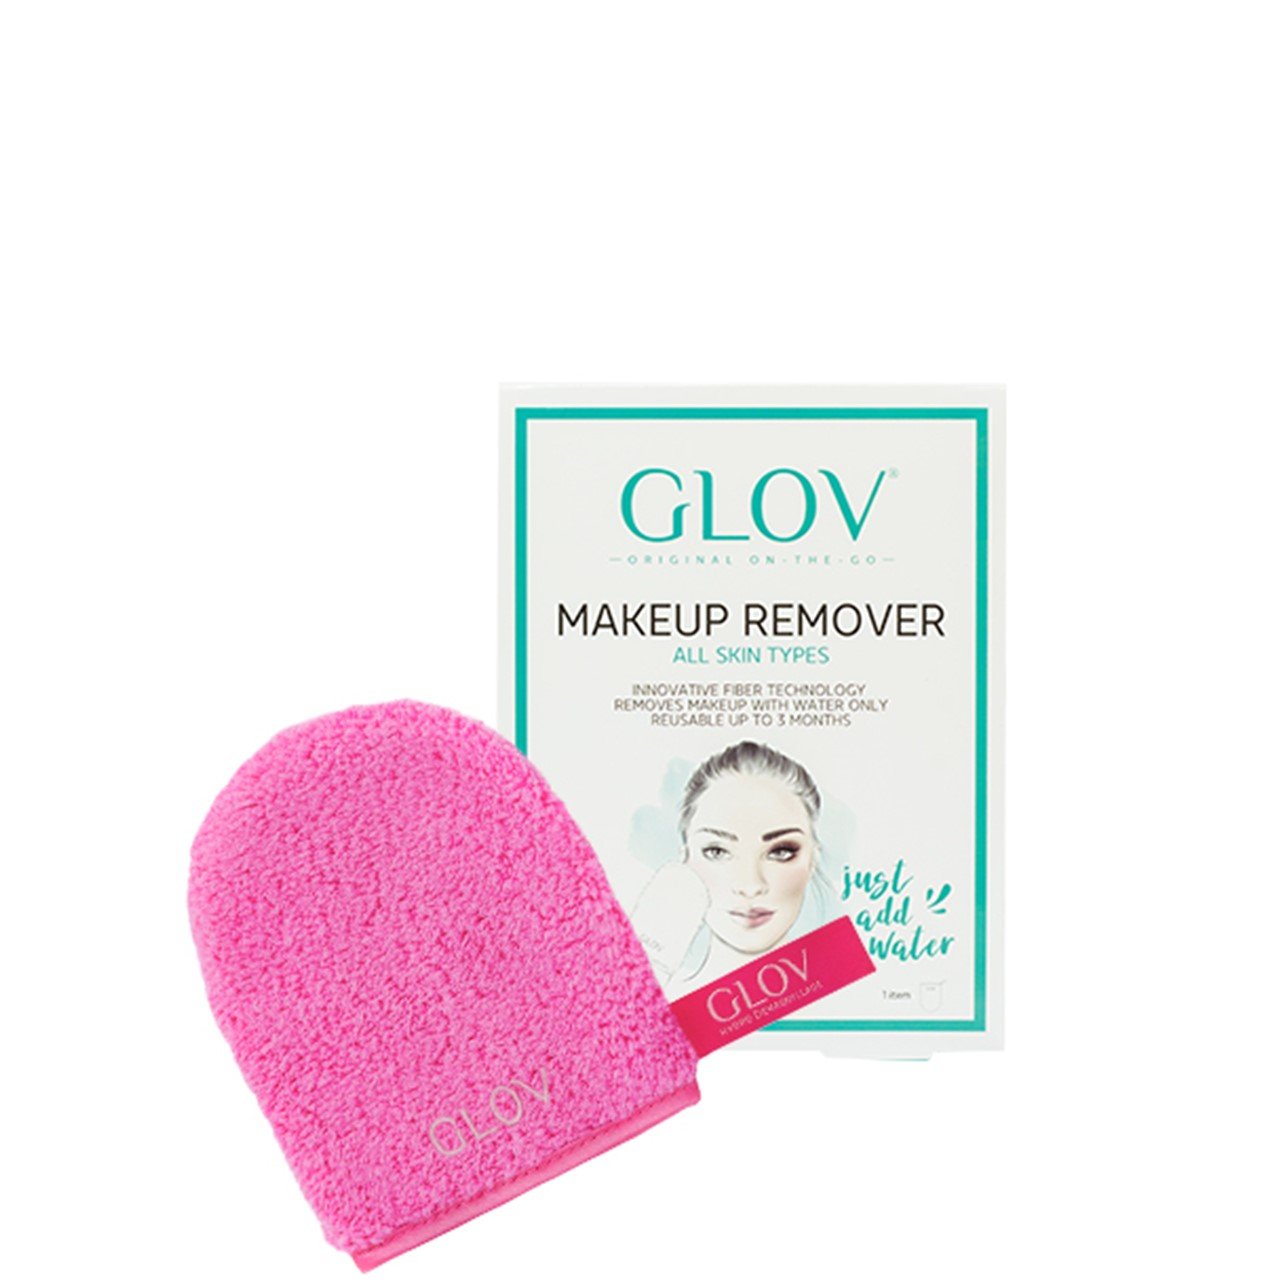 GLOV On-The-Go Makeup Remover Glove Party Pink